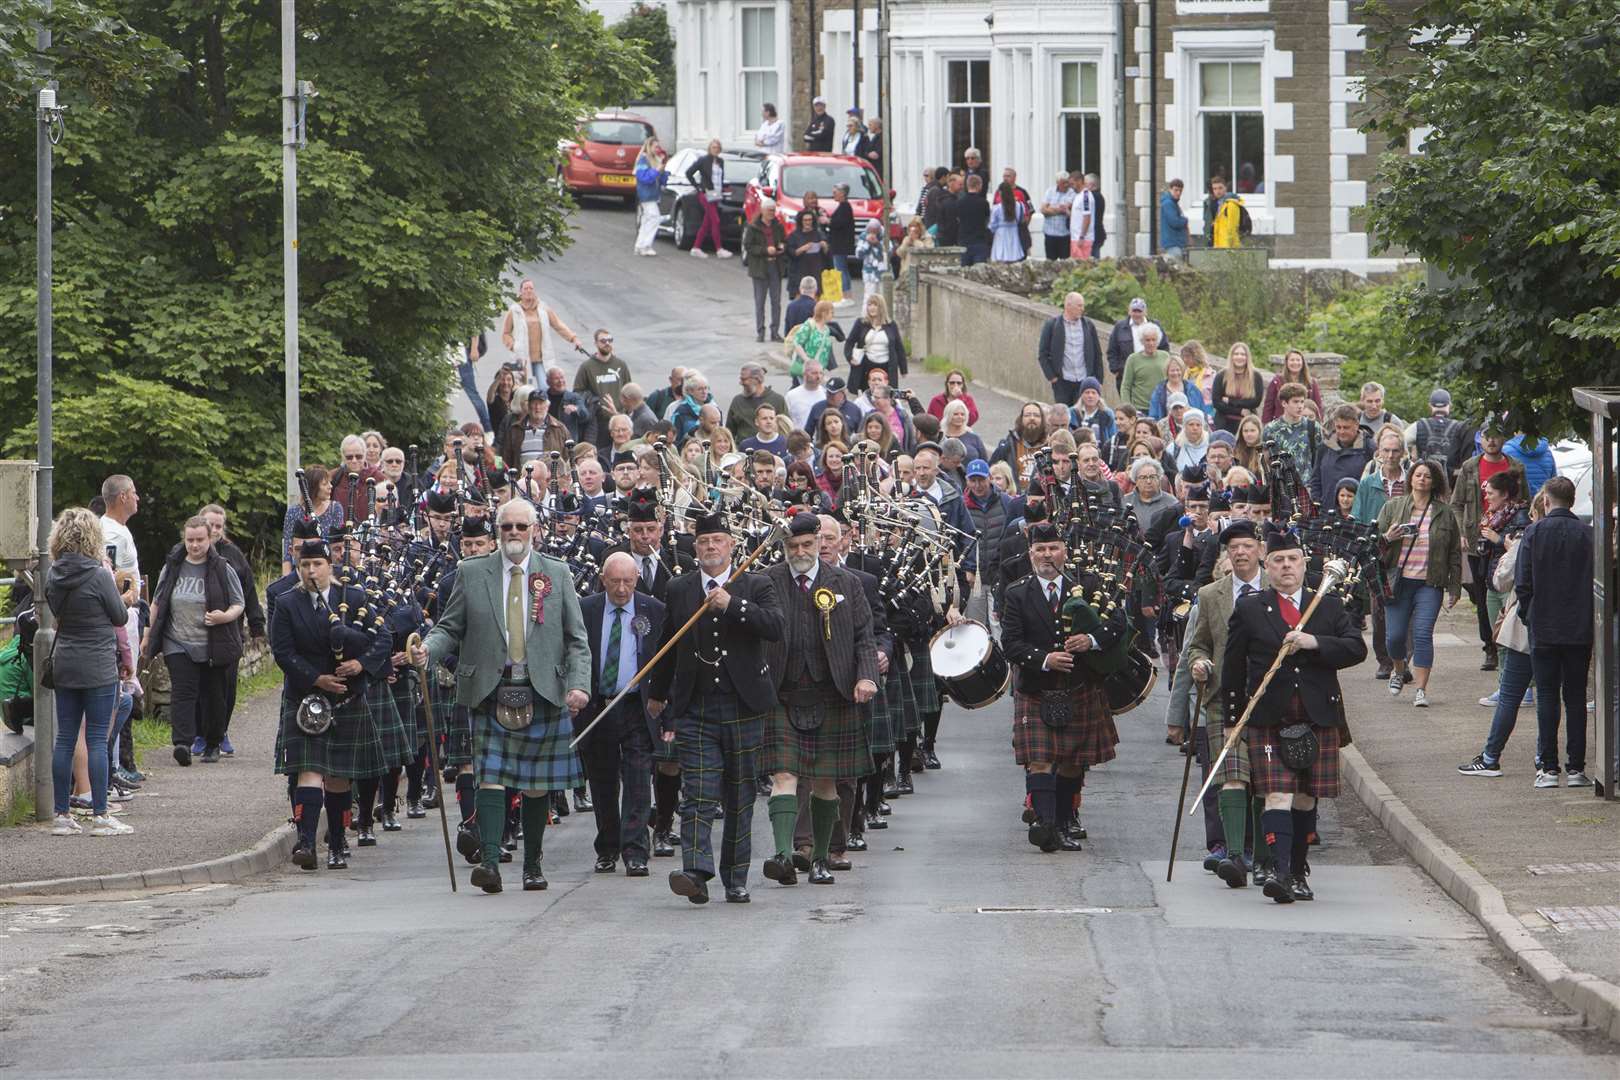 Halkirk Highland Games chieftain Lord Thurso, (front centre right) and president Alistair Swanson, (front centre left), lead the massed pipebands, followed by supporters on the march from the village to the games field. Photo: Robert MacDonald/Northern Studios